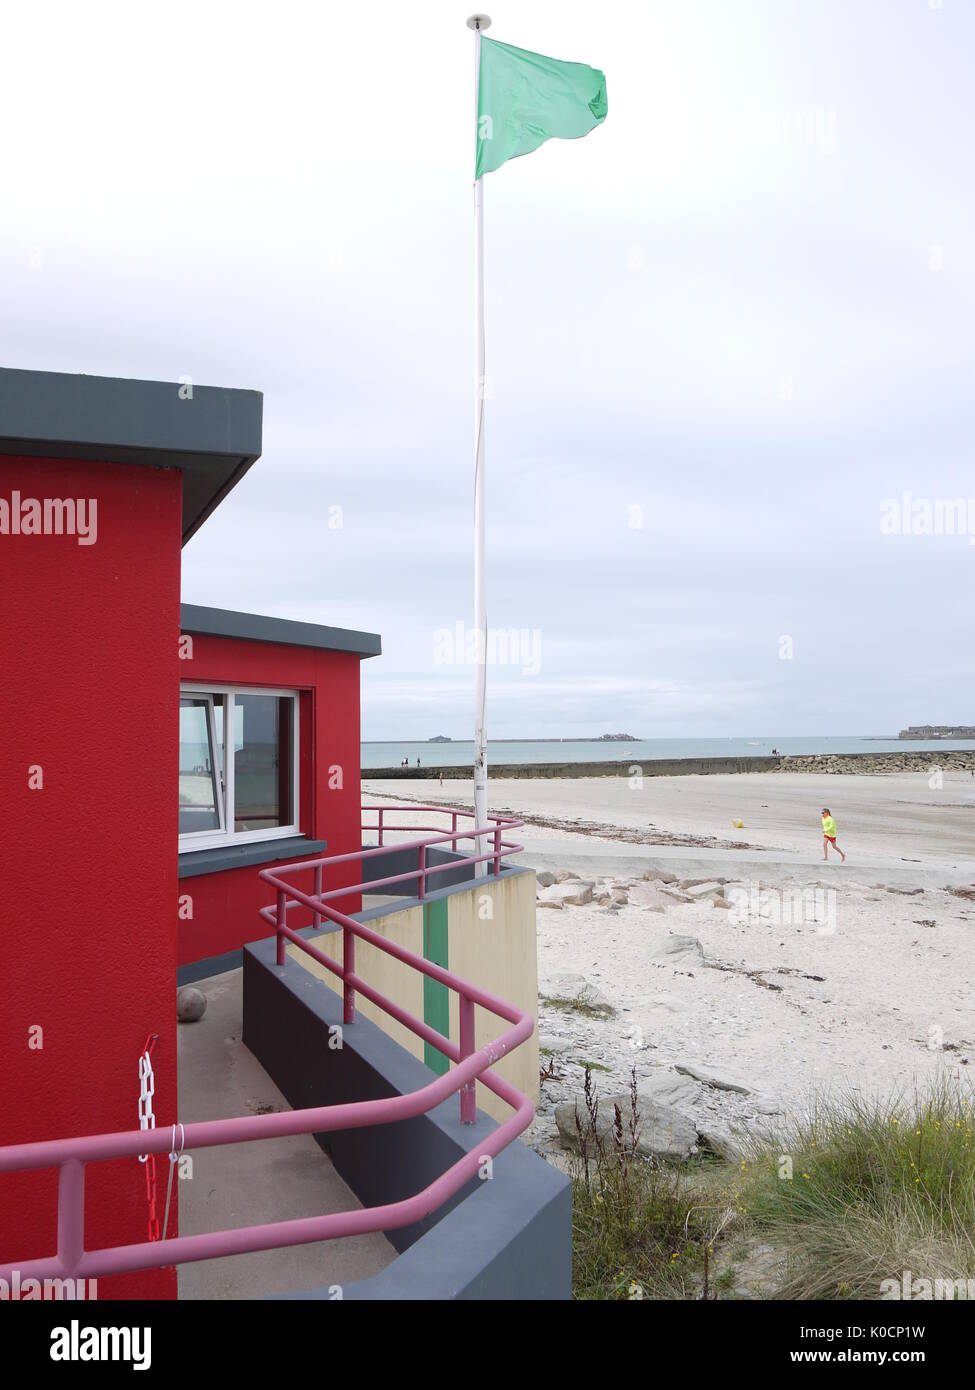 Green flag and red supervisor station on the beach of Cherbourg France Stock Photo